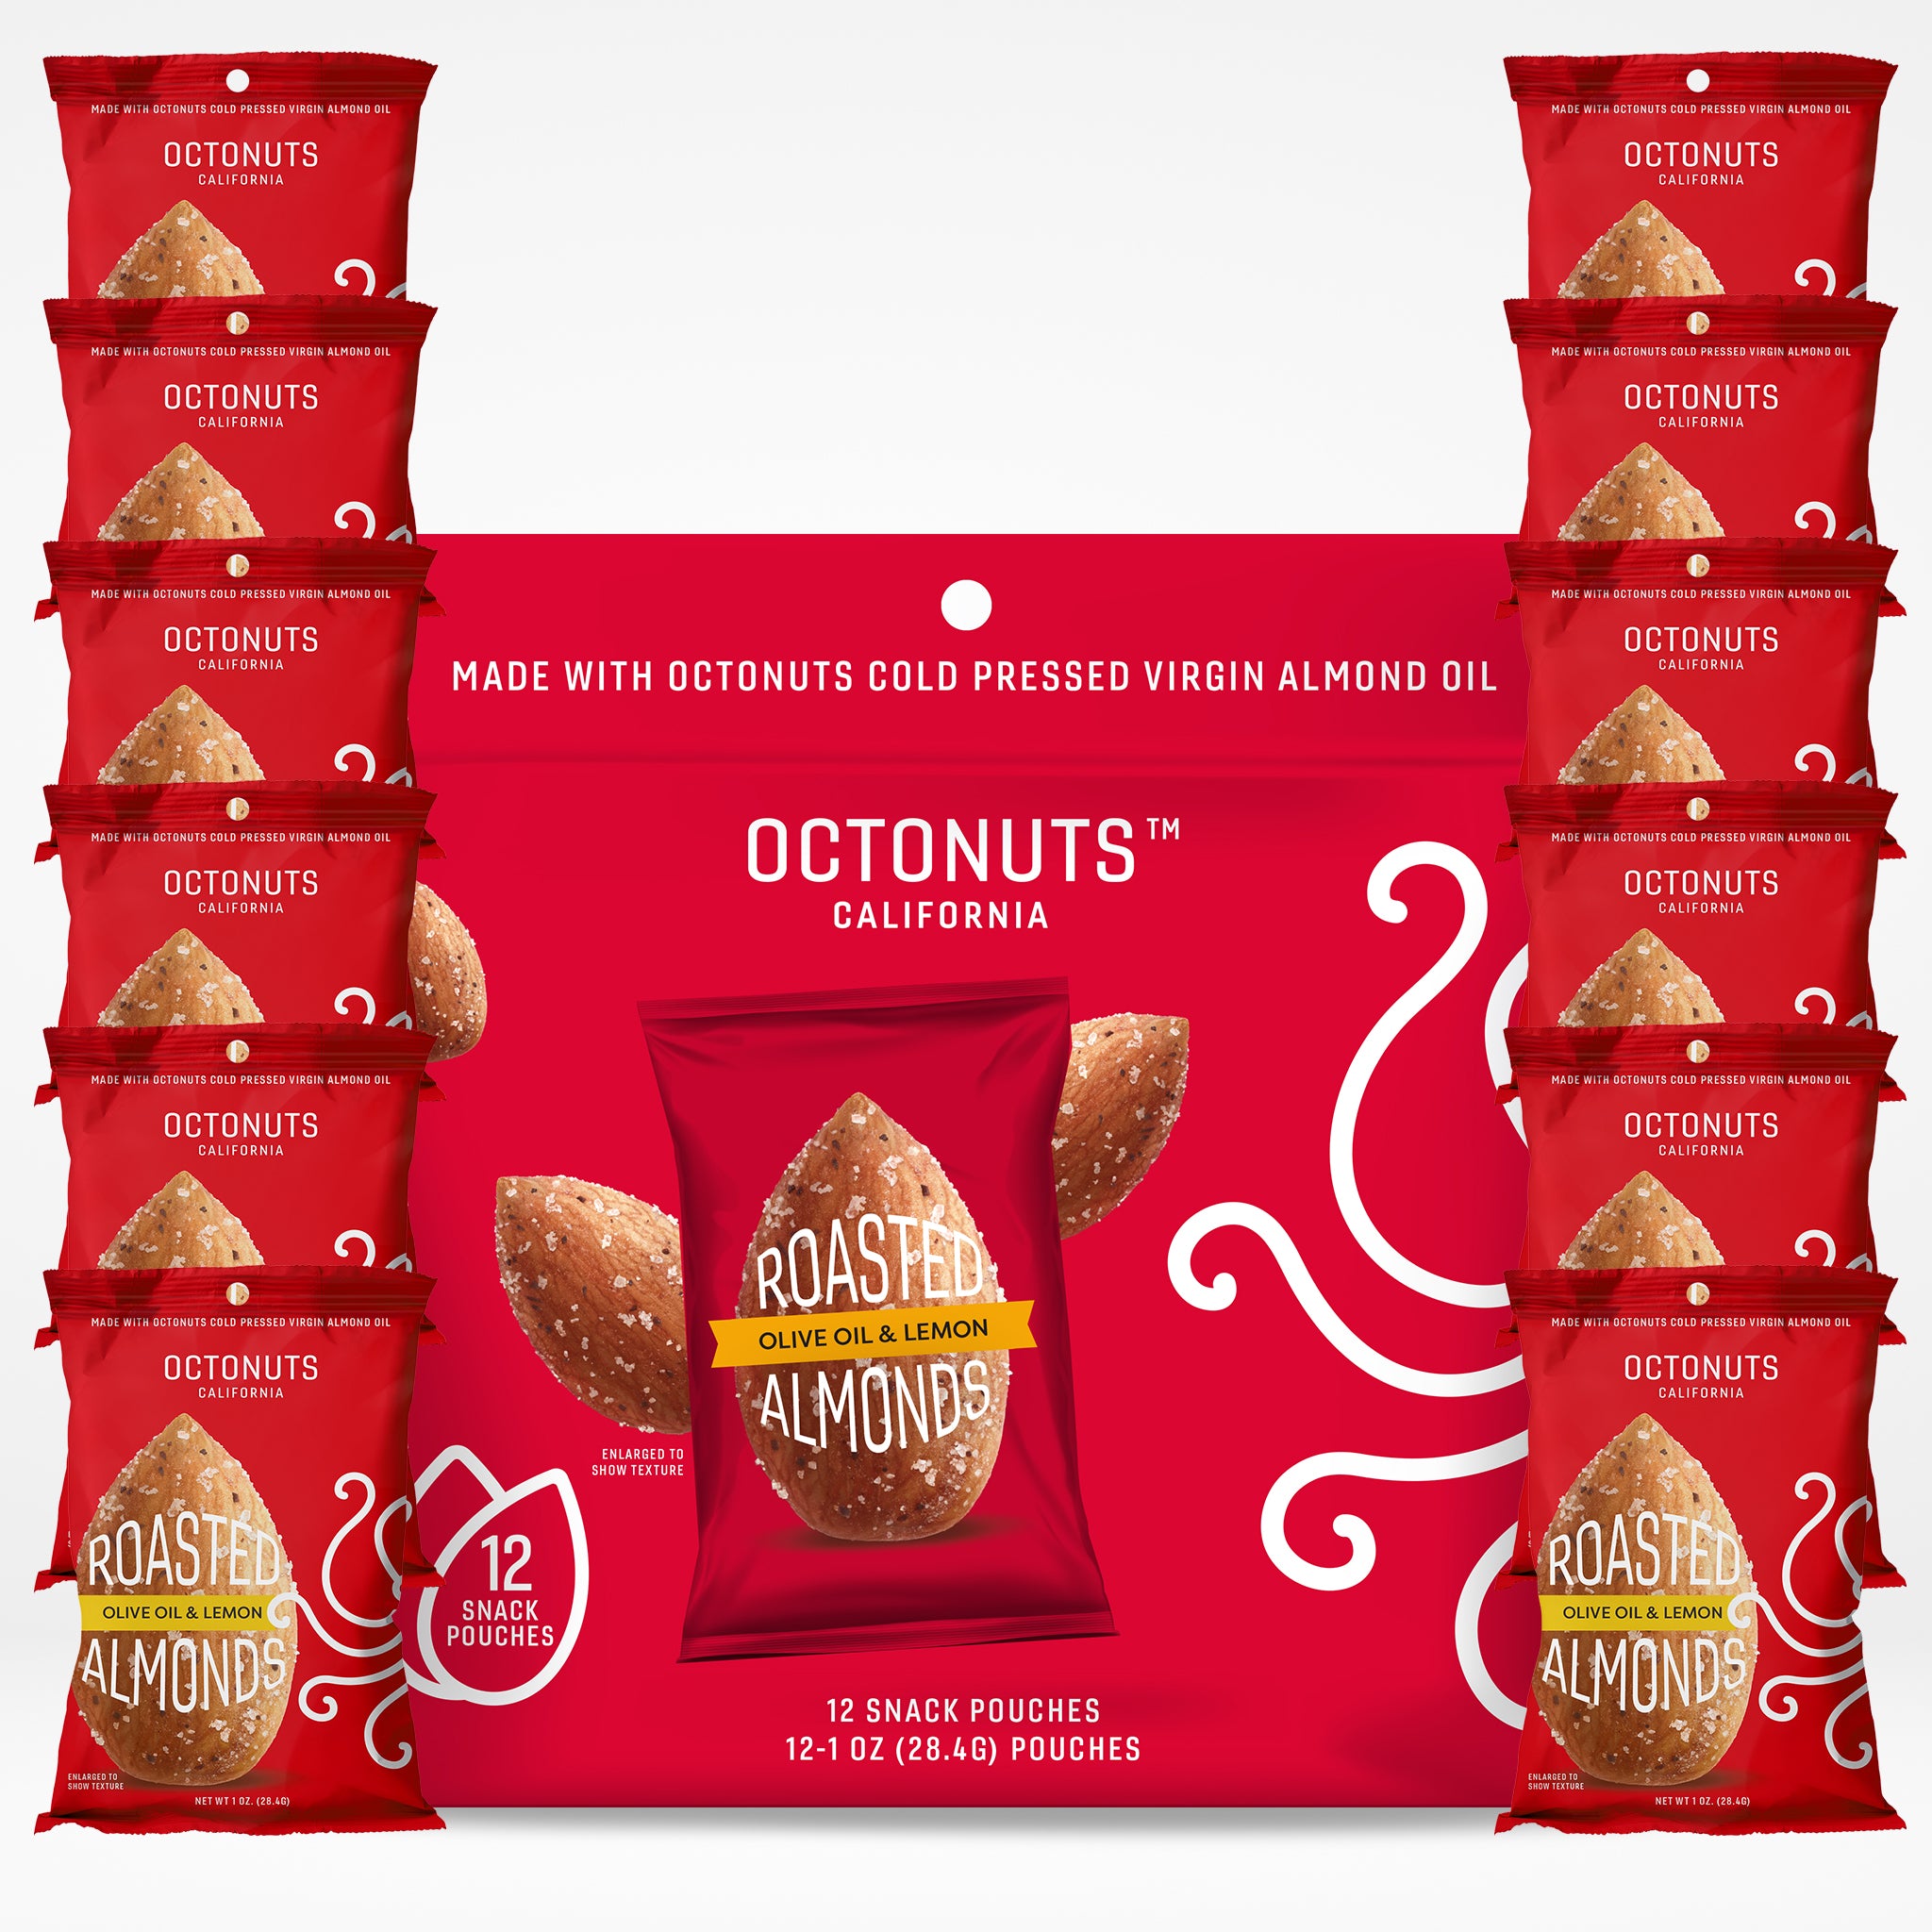 Roasted Olive Oil & Lemon Almonds Multipack - Contains 12 Snack Pouches